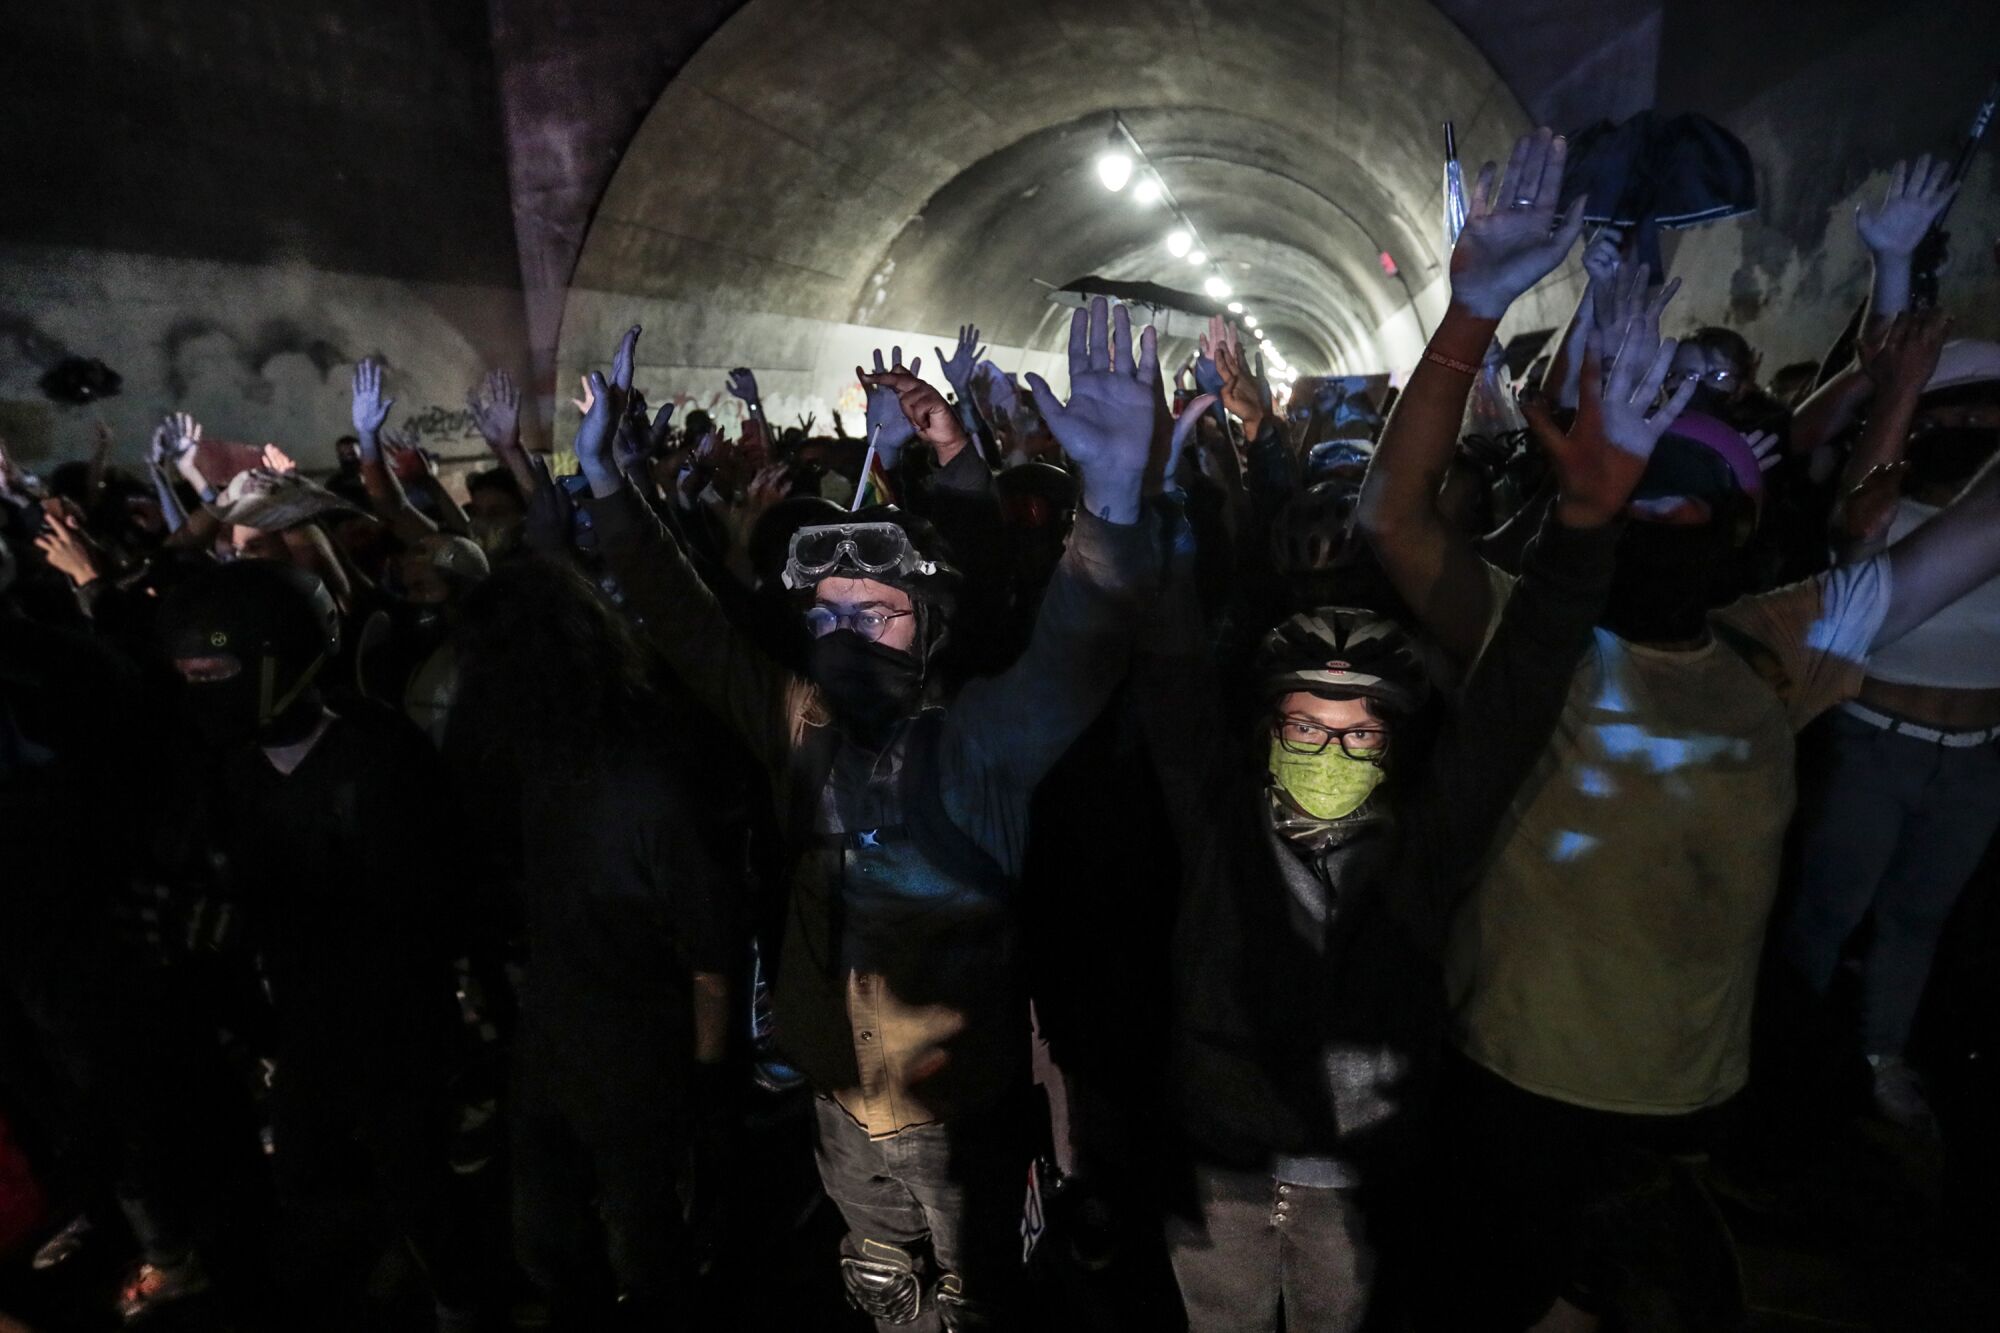 Protesters raise their hands as LAPD officers converge on them from both sides in the Third Street underpass.